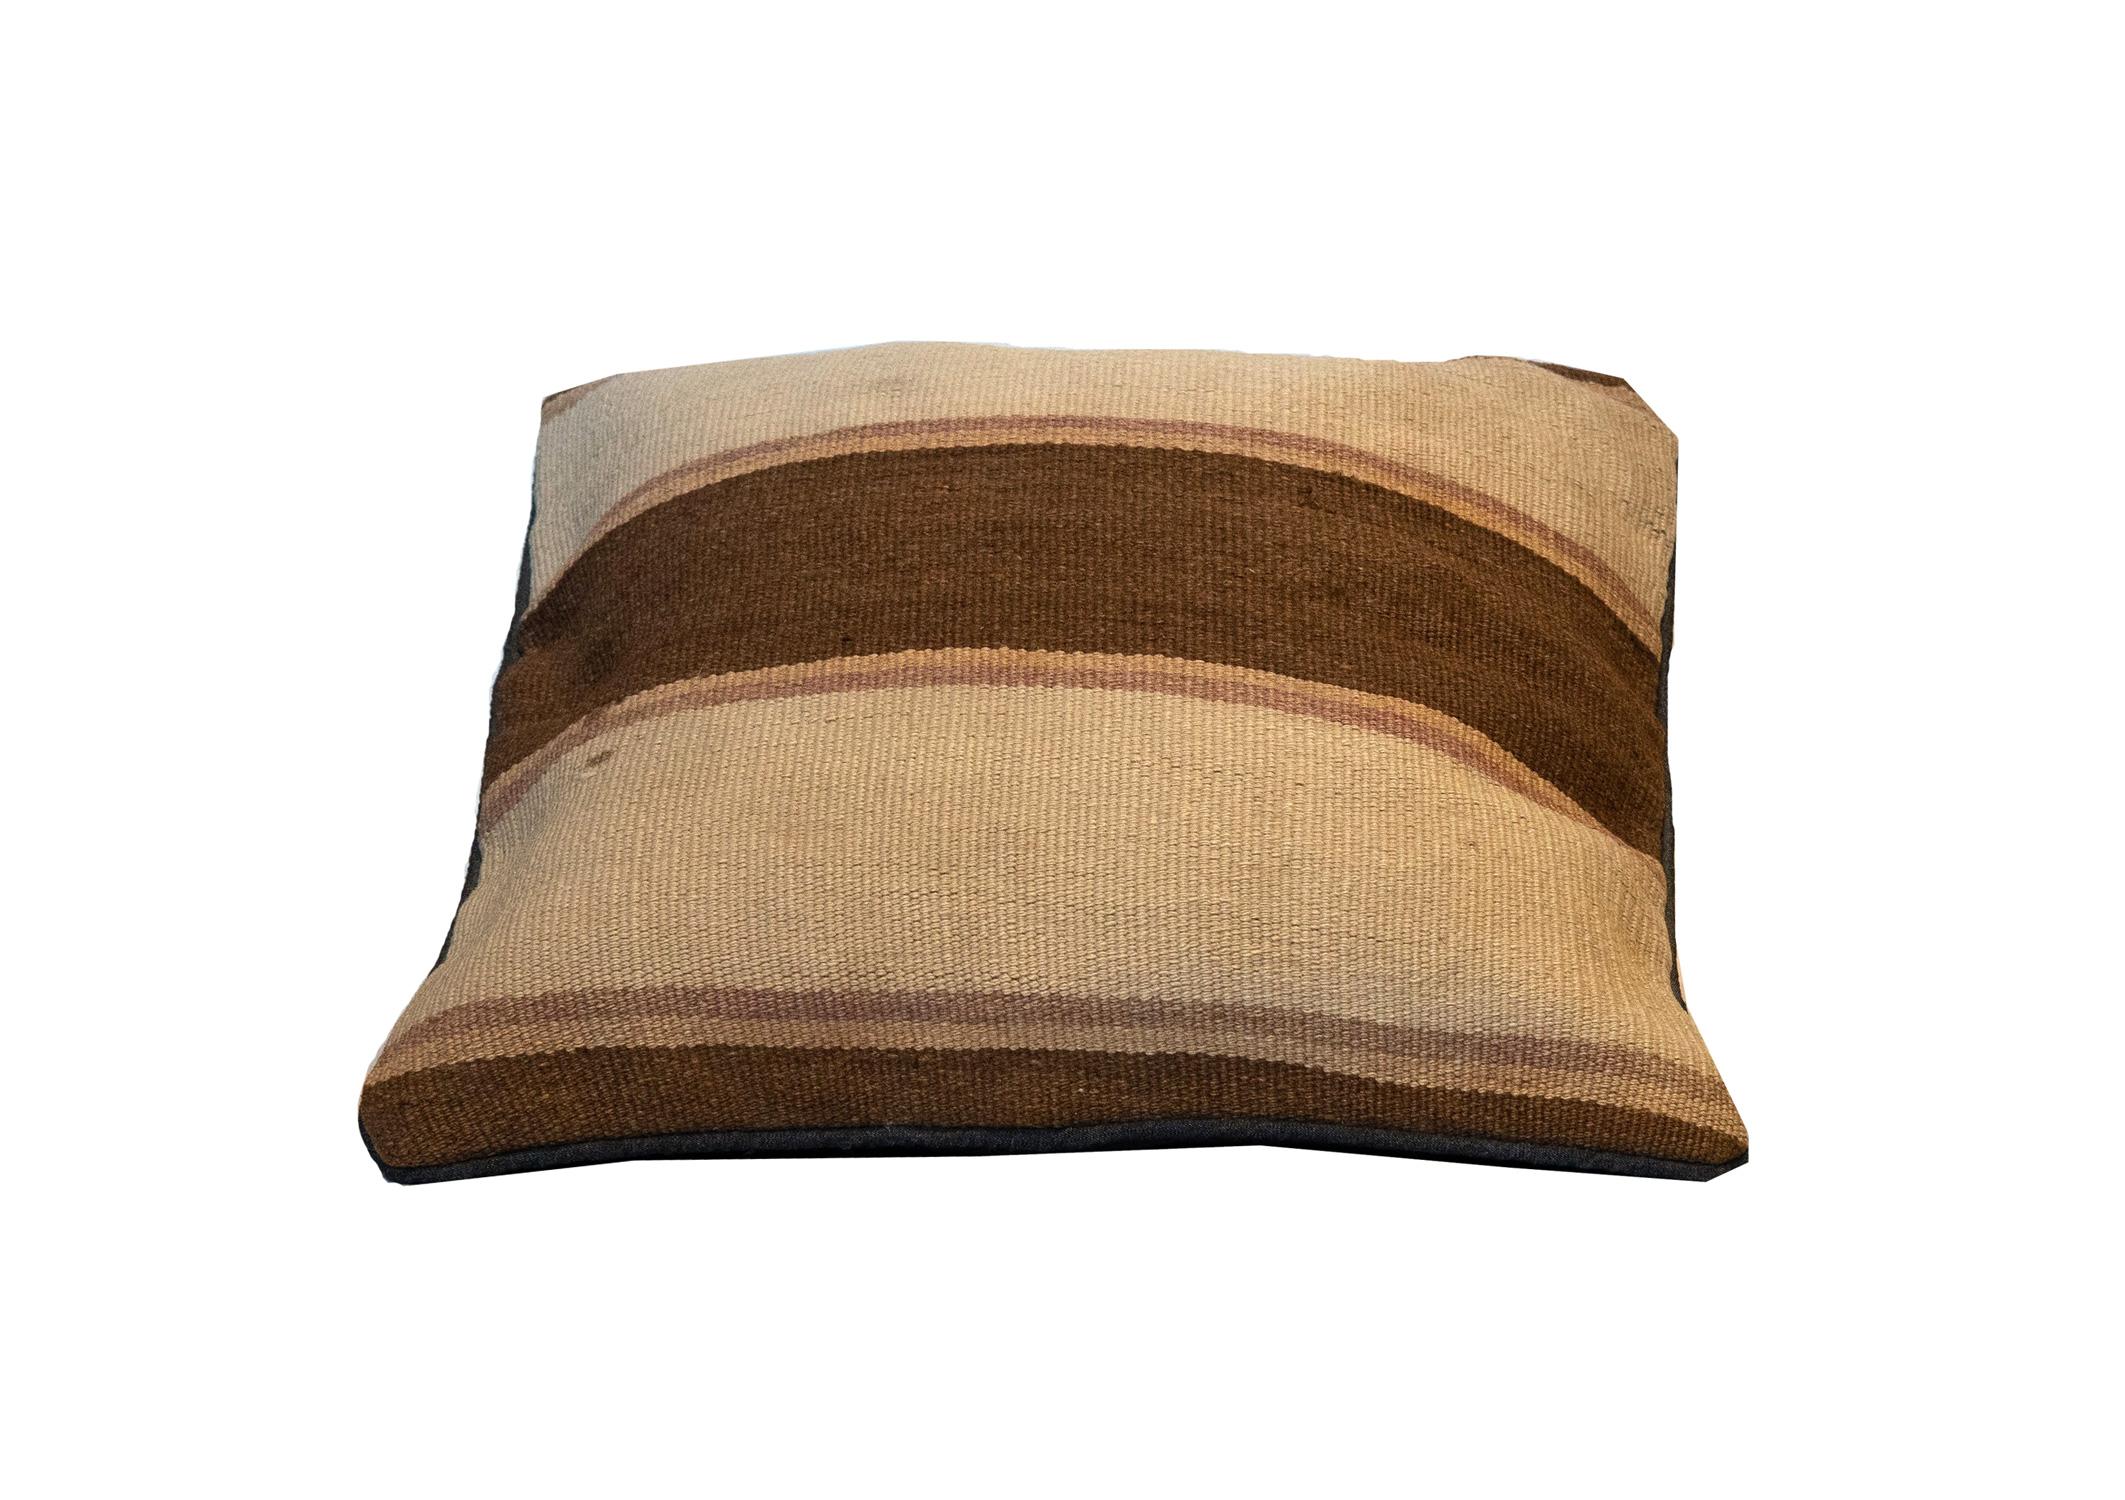 This simple cushion has been woven by hand using traditional kilim weaving techniques with hand-spun wool. Featuring a simple stripe design, with thick cream and brown lines, with smaller beige and subtle pink lines. With some small signs of age.